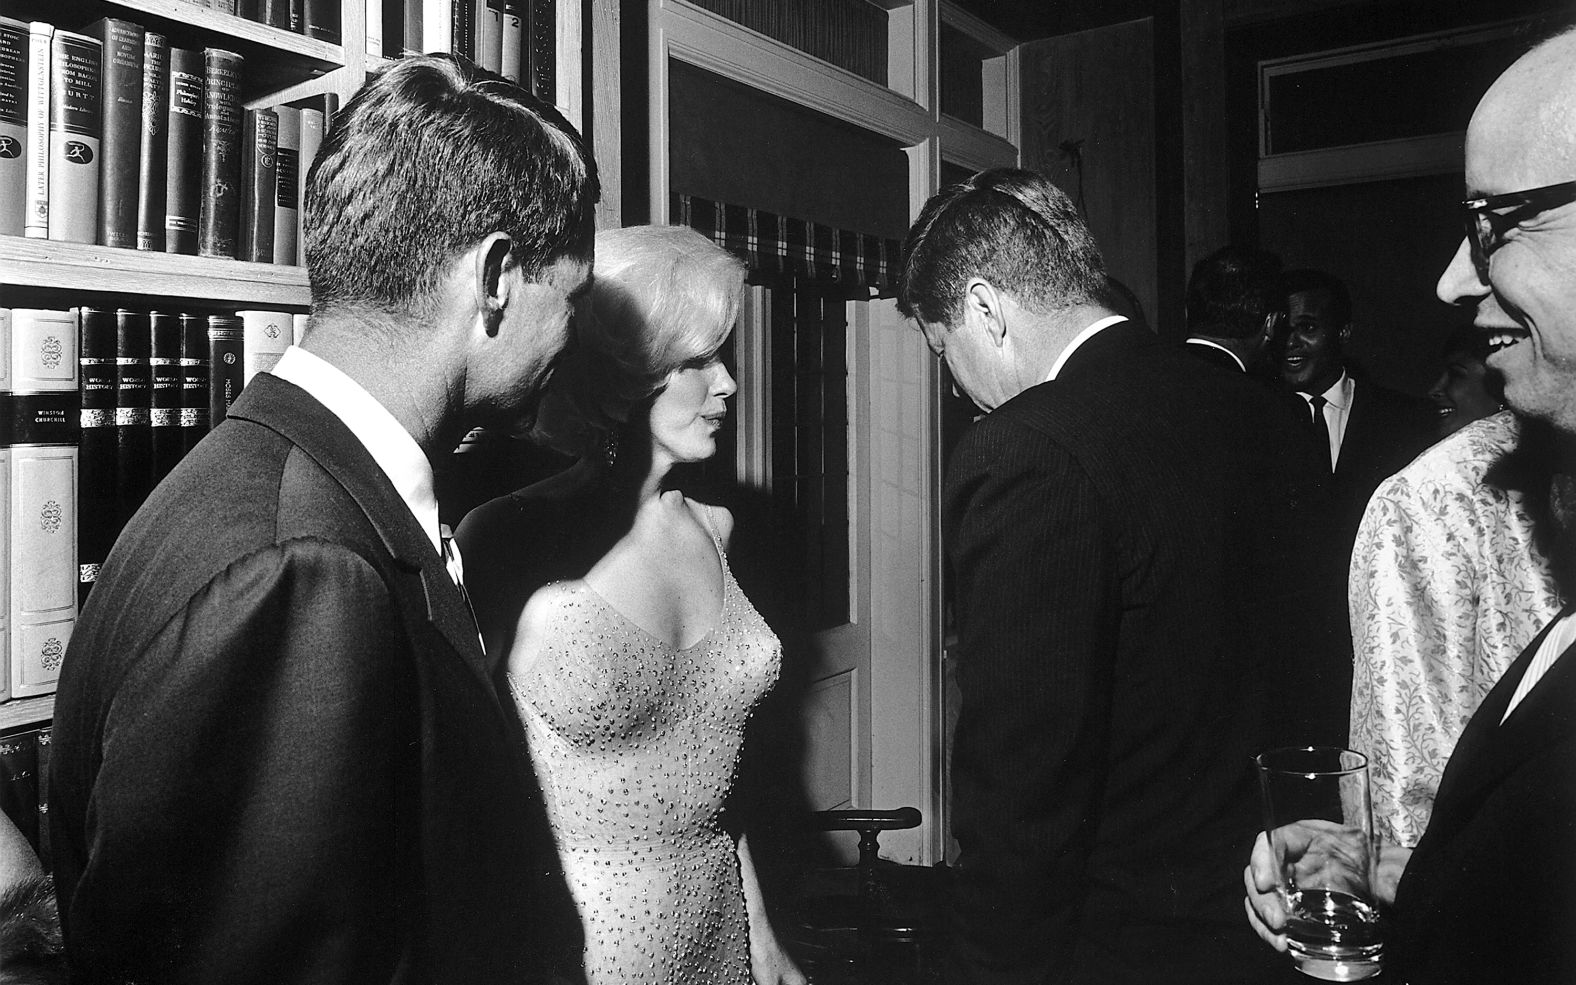 President John F. Kennedy (with his back to the camera), US Attorney General Robert Kennedy (far left), and Monroe on the President's 45th birthday. Monroe flew to New York to sing him a very erotic version of "Happy Birthday." She wore a beige rhinestone-encrusted dress. It's said the dress was so tight that she had to be sewn into it before getting on stage.<br /><br />"I was honored when they asked me to appear at Madison Square Garden. You know, I was a little worried about my voice, but it came out," Monroe said.<br /><br />The dress sold for <a href="index.php?page=&url=https%3A%2F%2Fwww.cnn.com%2Fstyle%2Farticle%2Fmarilyn-monroe-dress-new-record%2Findex.html" target="_blank">$4.8 million in an auction 2016, </a>breaking its own record as the most expensive personal item of clothing.